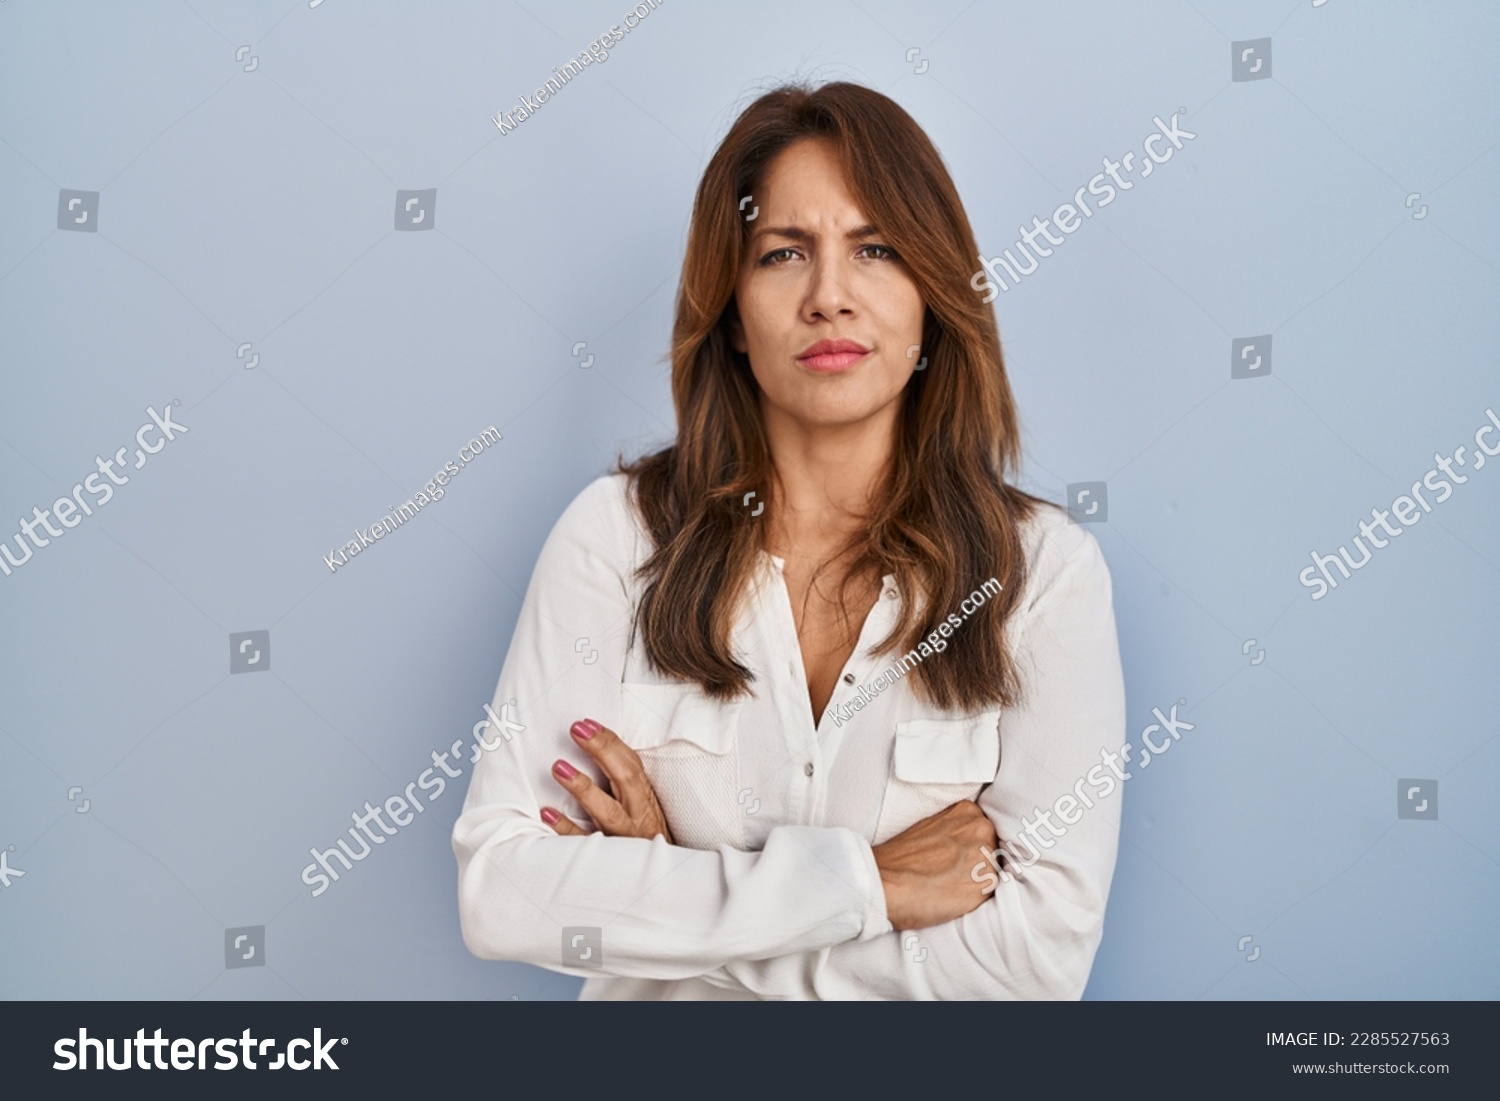 Hispanic woman standing over isolated background skeptic and nervous, disapproving expression on face with crossed arms. negative person.  #2285527563